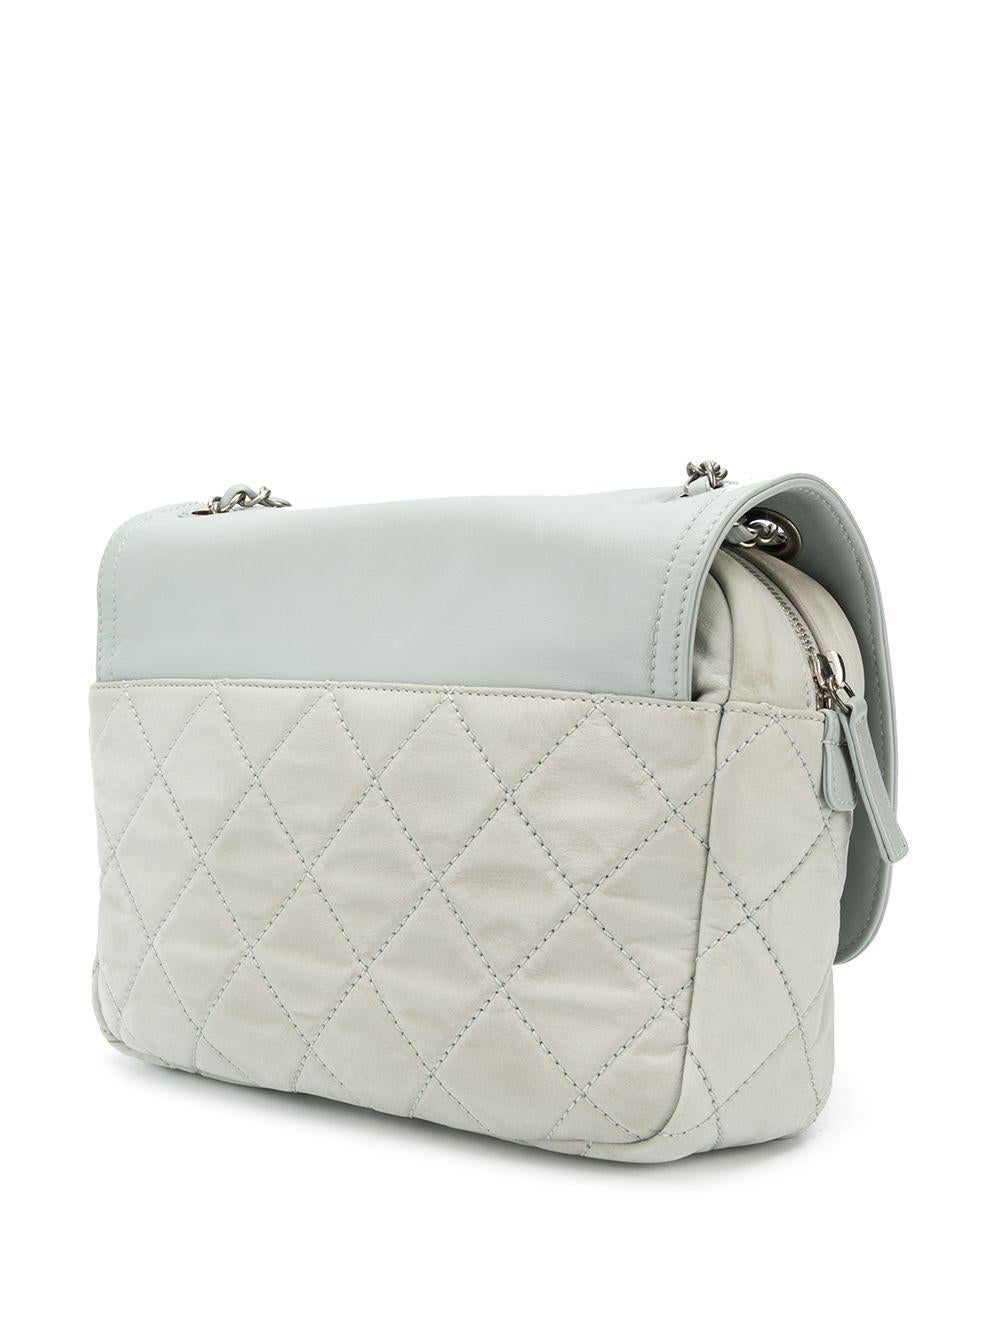 Crafted in Italy from iridescent microfiber nylon in a soft shade of duck-egg blue, this pre-owned Chanel quilted flap bag features the classic CC turn-lock accented by gunmetal hardware, a matching duck-egg blue. lambskin leather fold-over top and